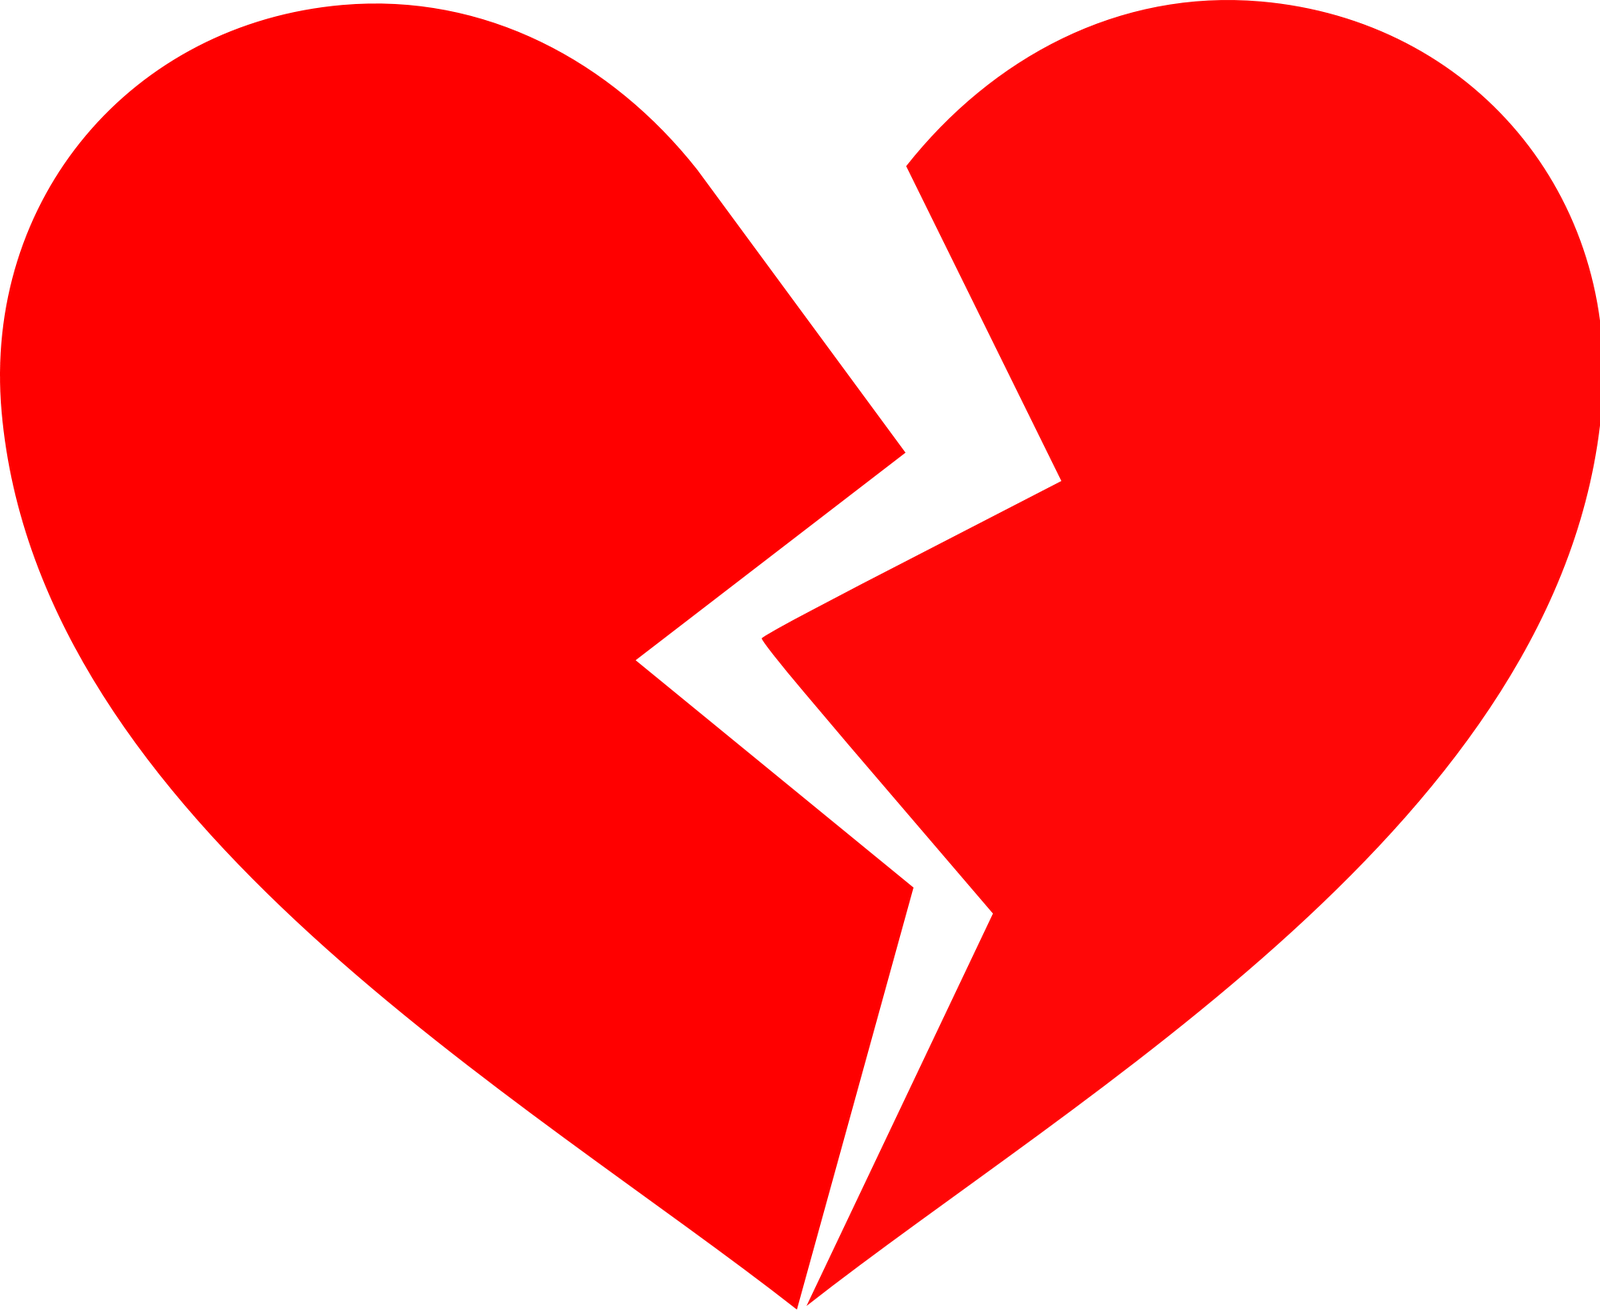 Broken Heart Clip Art | Clipart library - Free Clipart Images